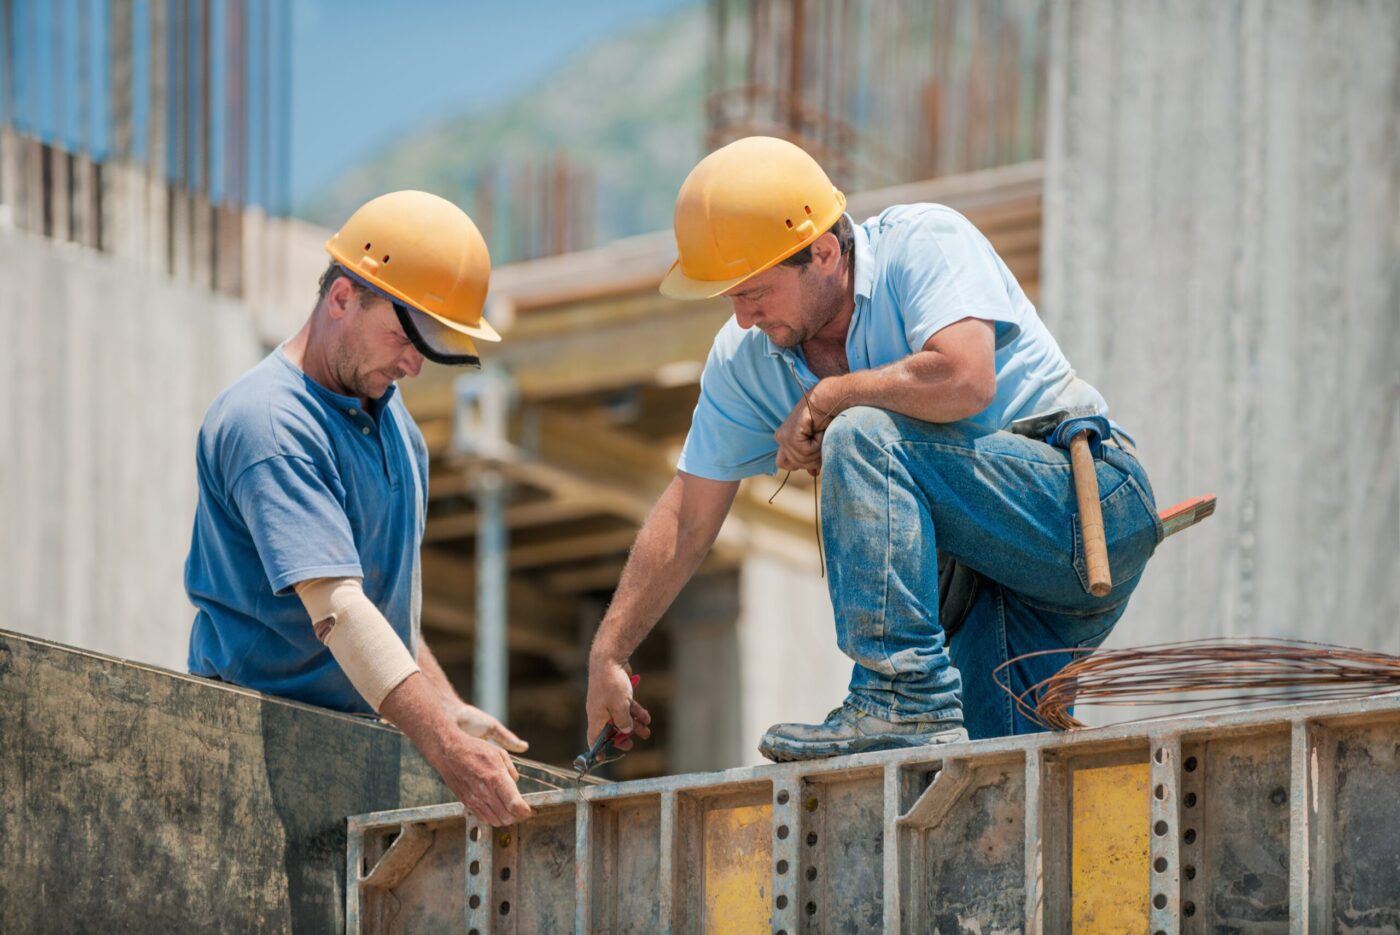 Two construction workers in hard hats engaged in building work.